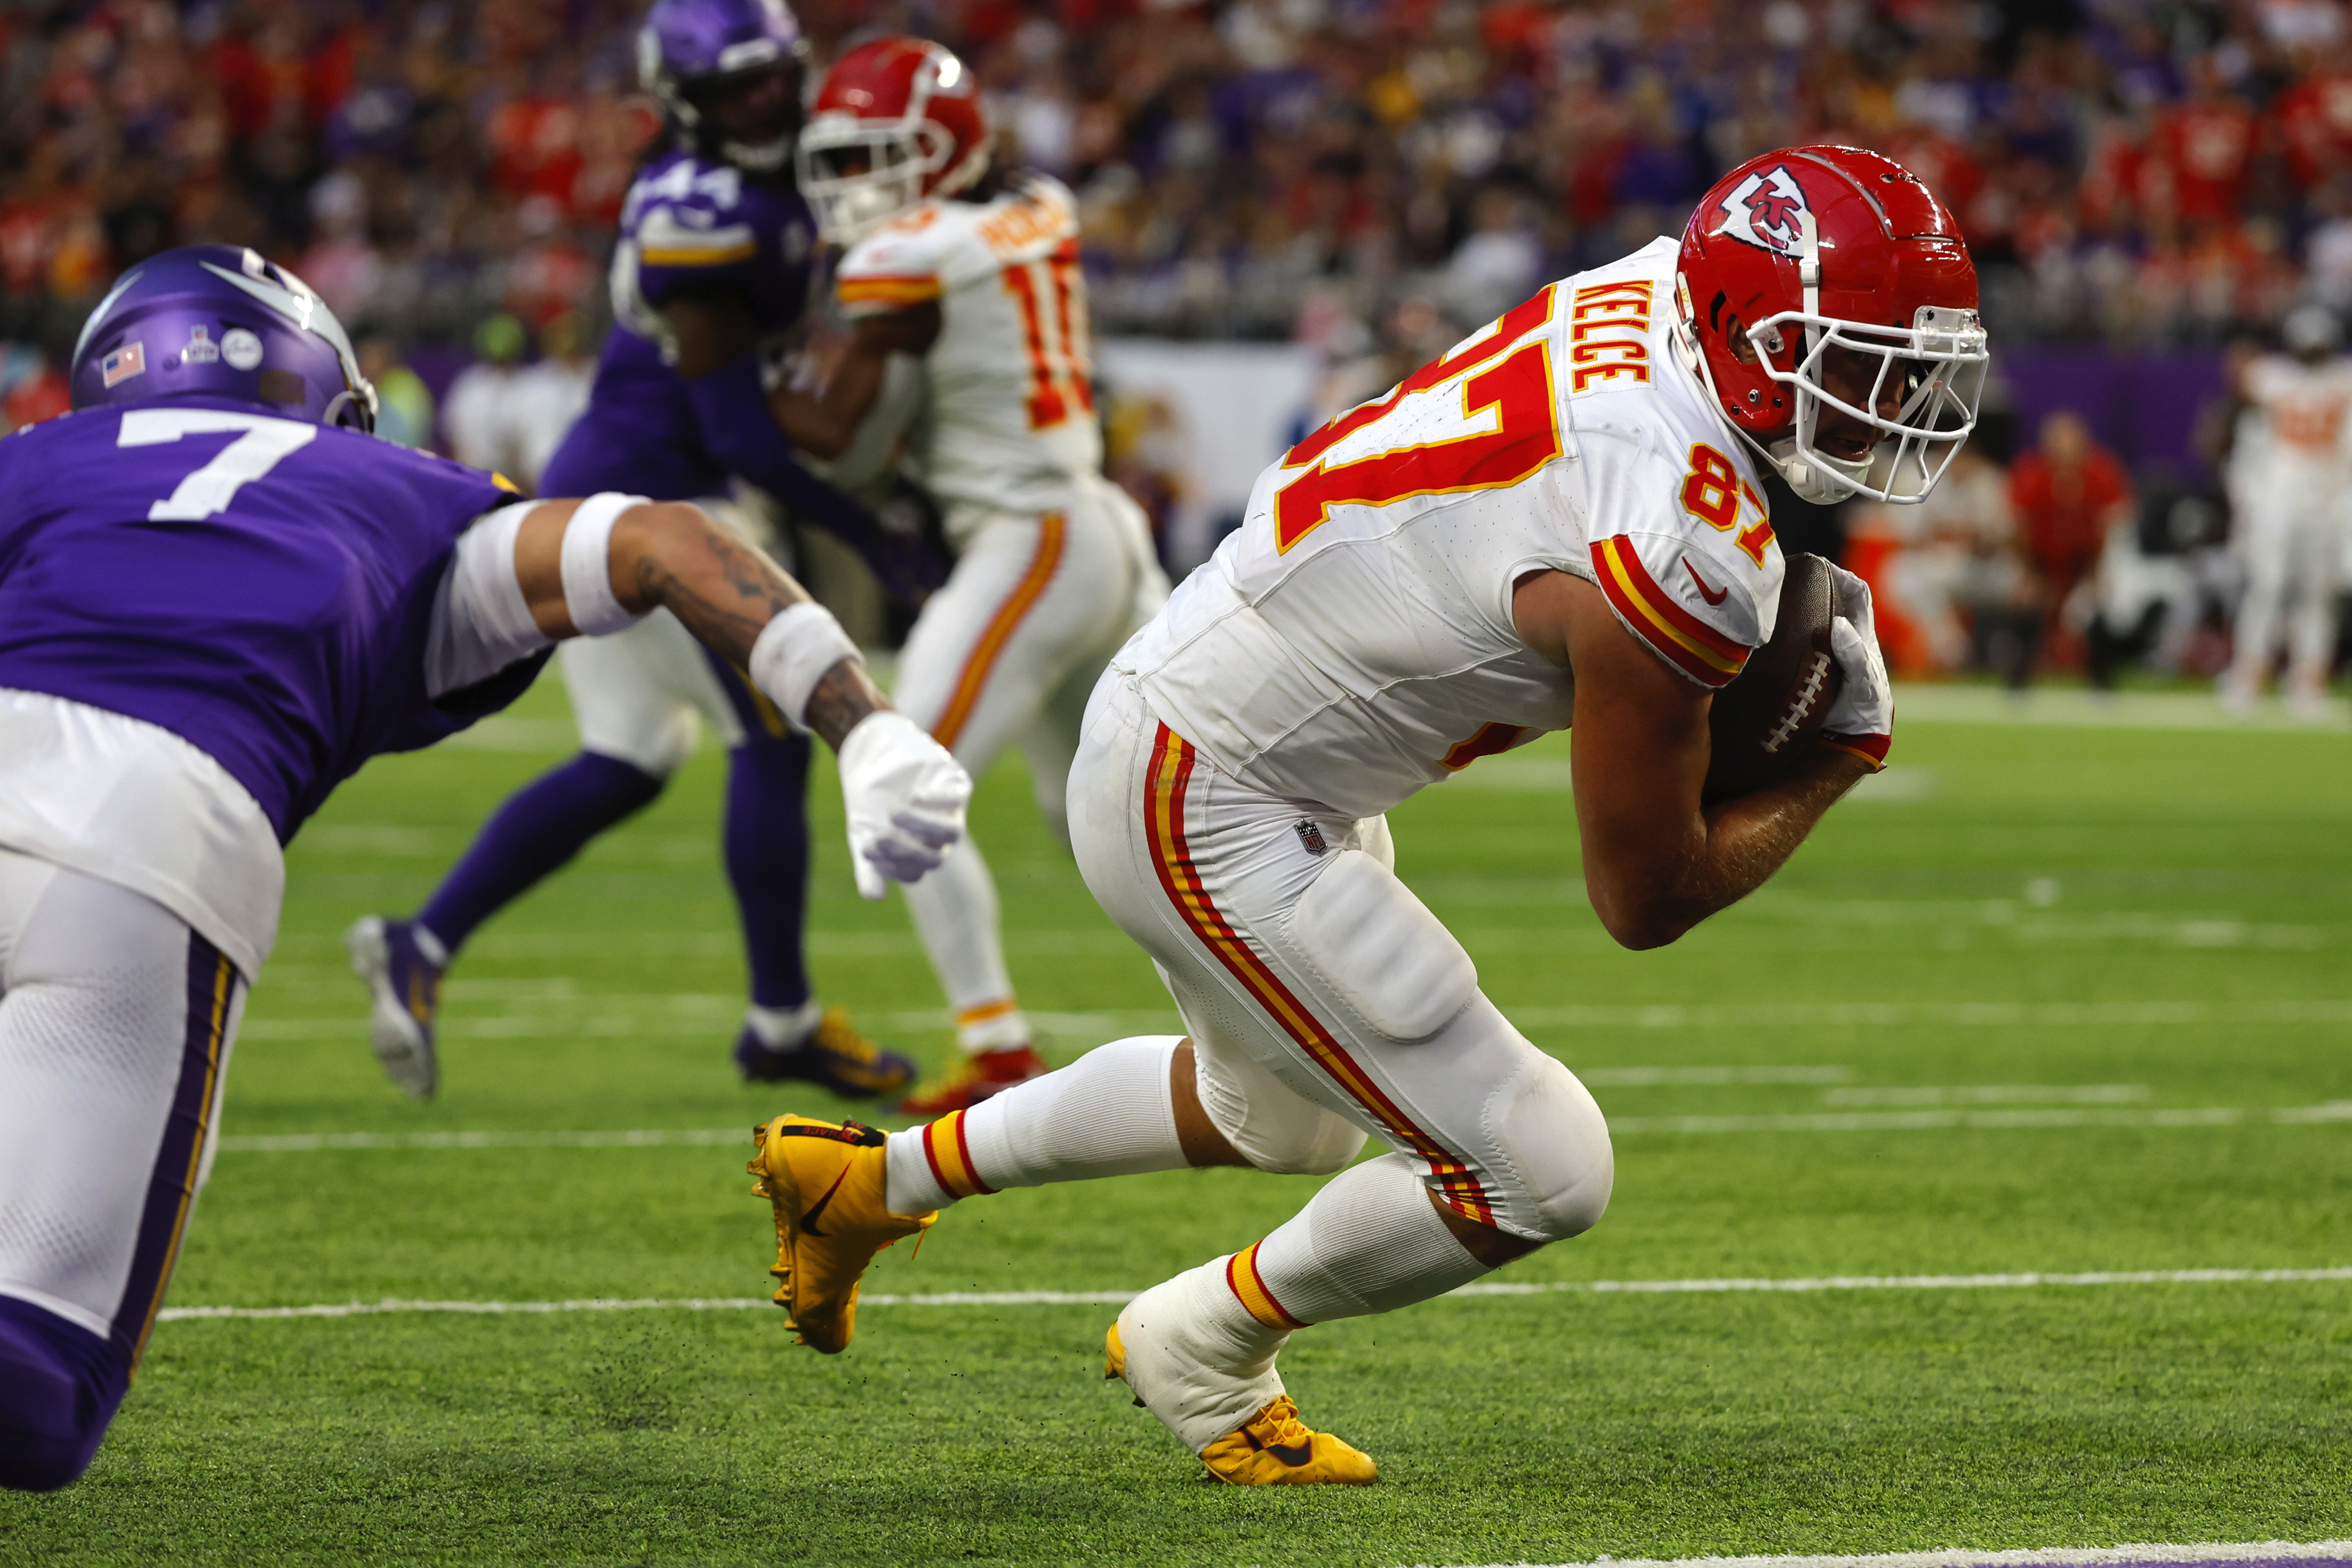 Chiefs TE Travis Kelce selected to 2022 Pro Bowl